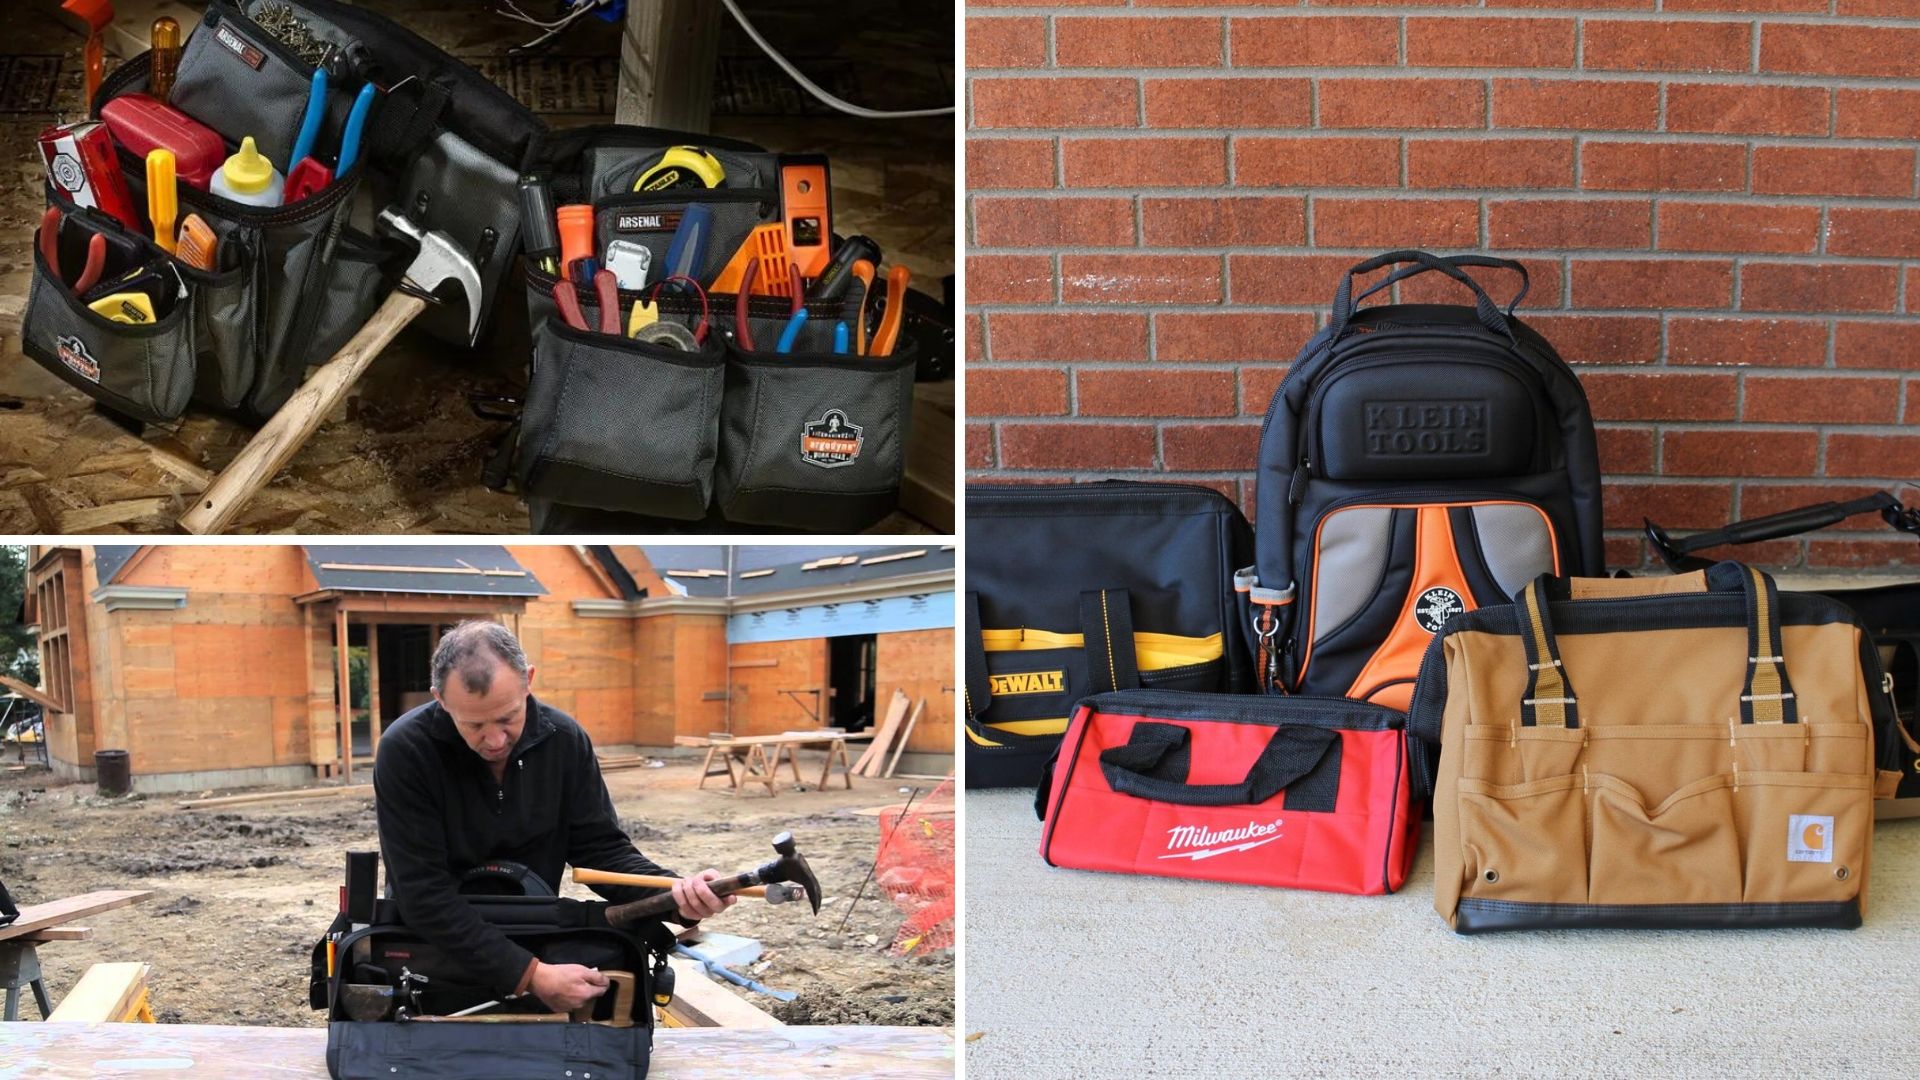 A person with a veto tool bag and a variety of tool bags.